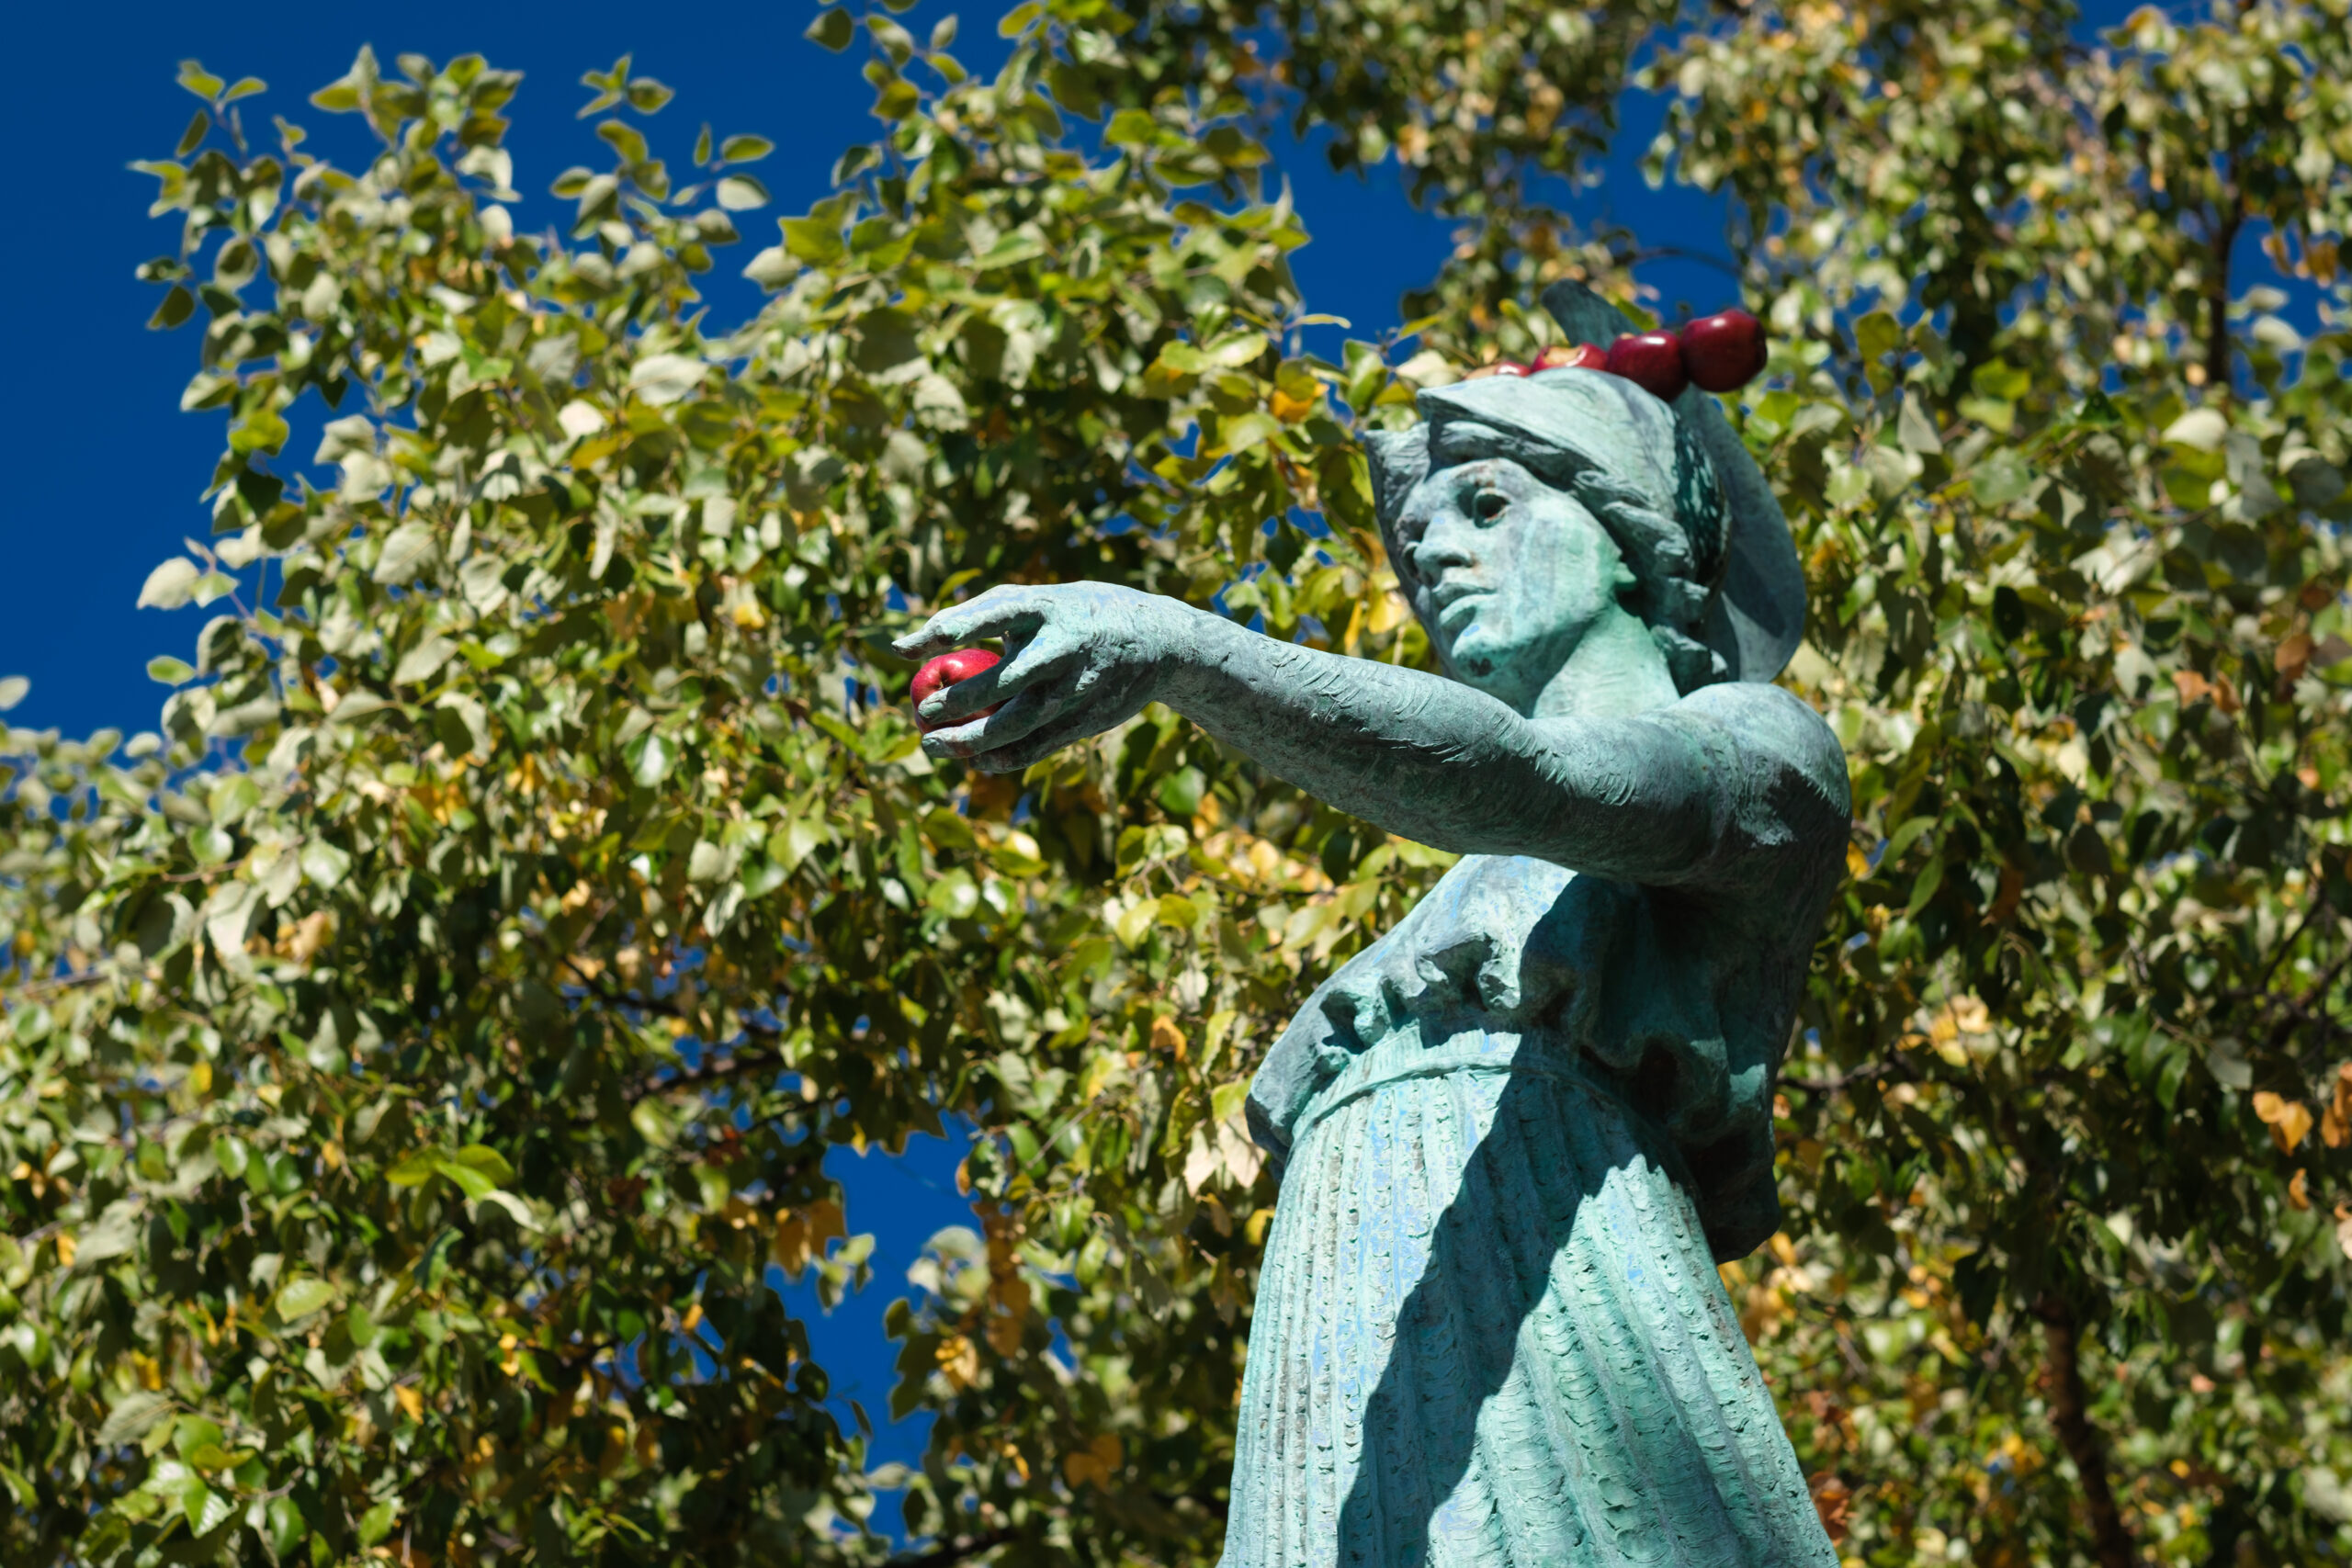 Statue of Minerva, arm outreached with apple in her hand and four apples on her head